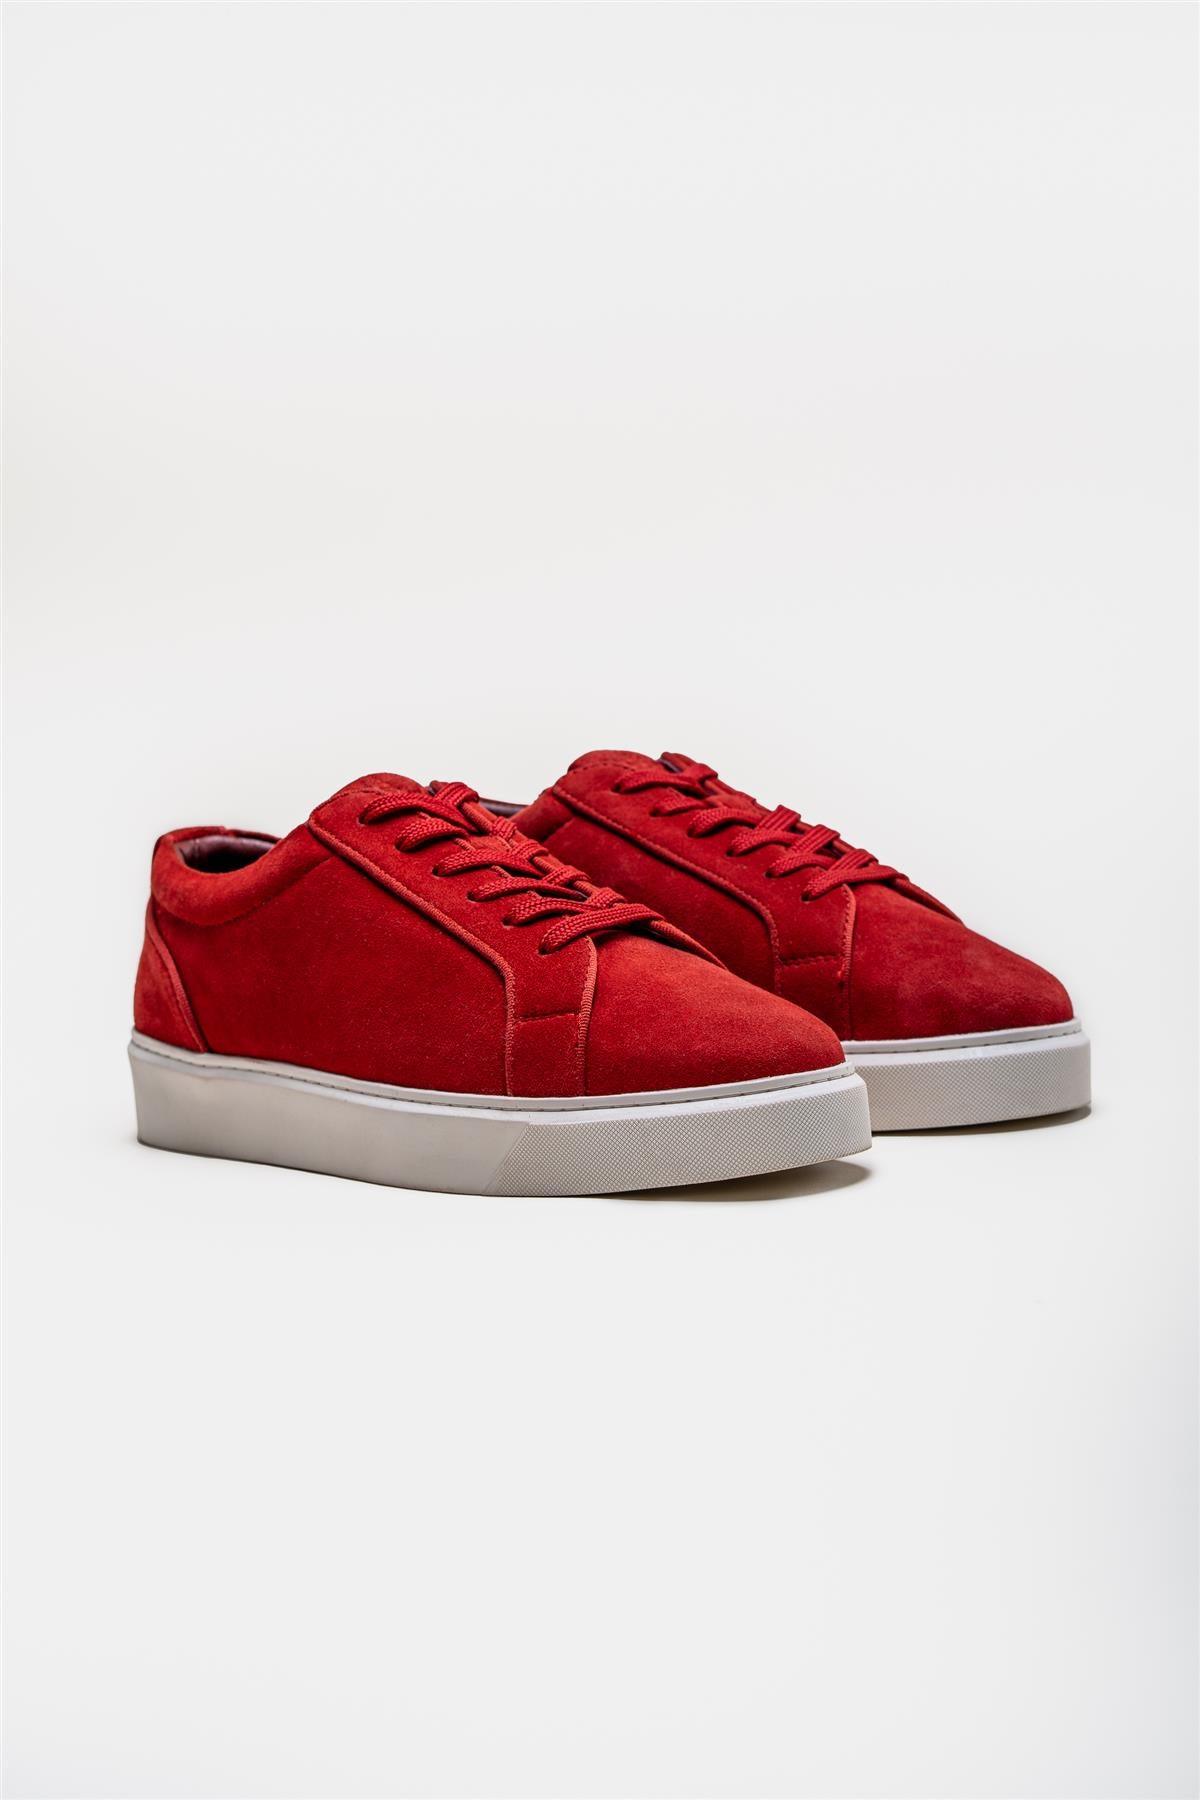 P50 red sneaker front